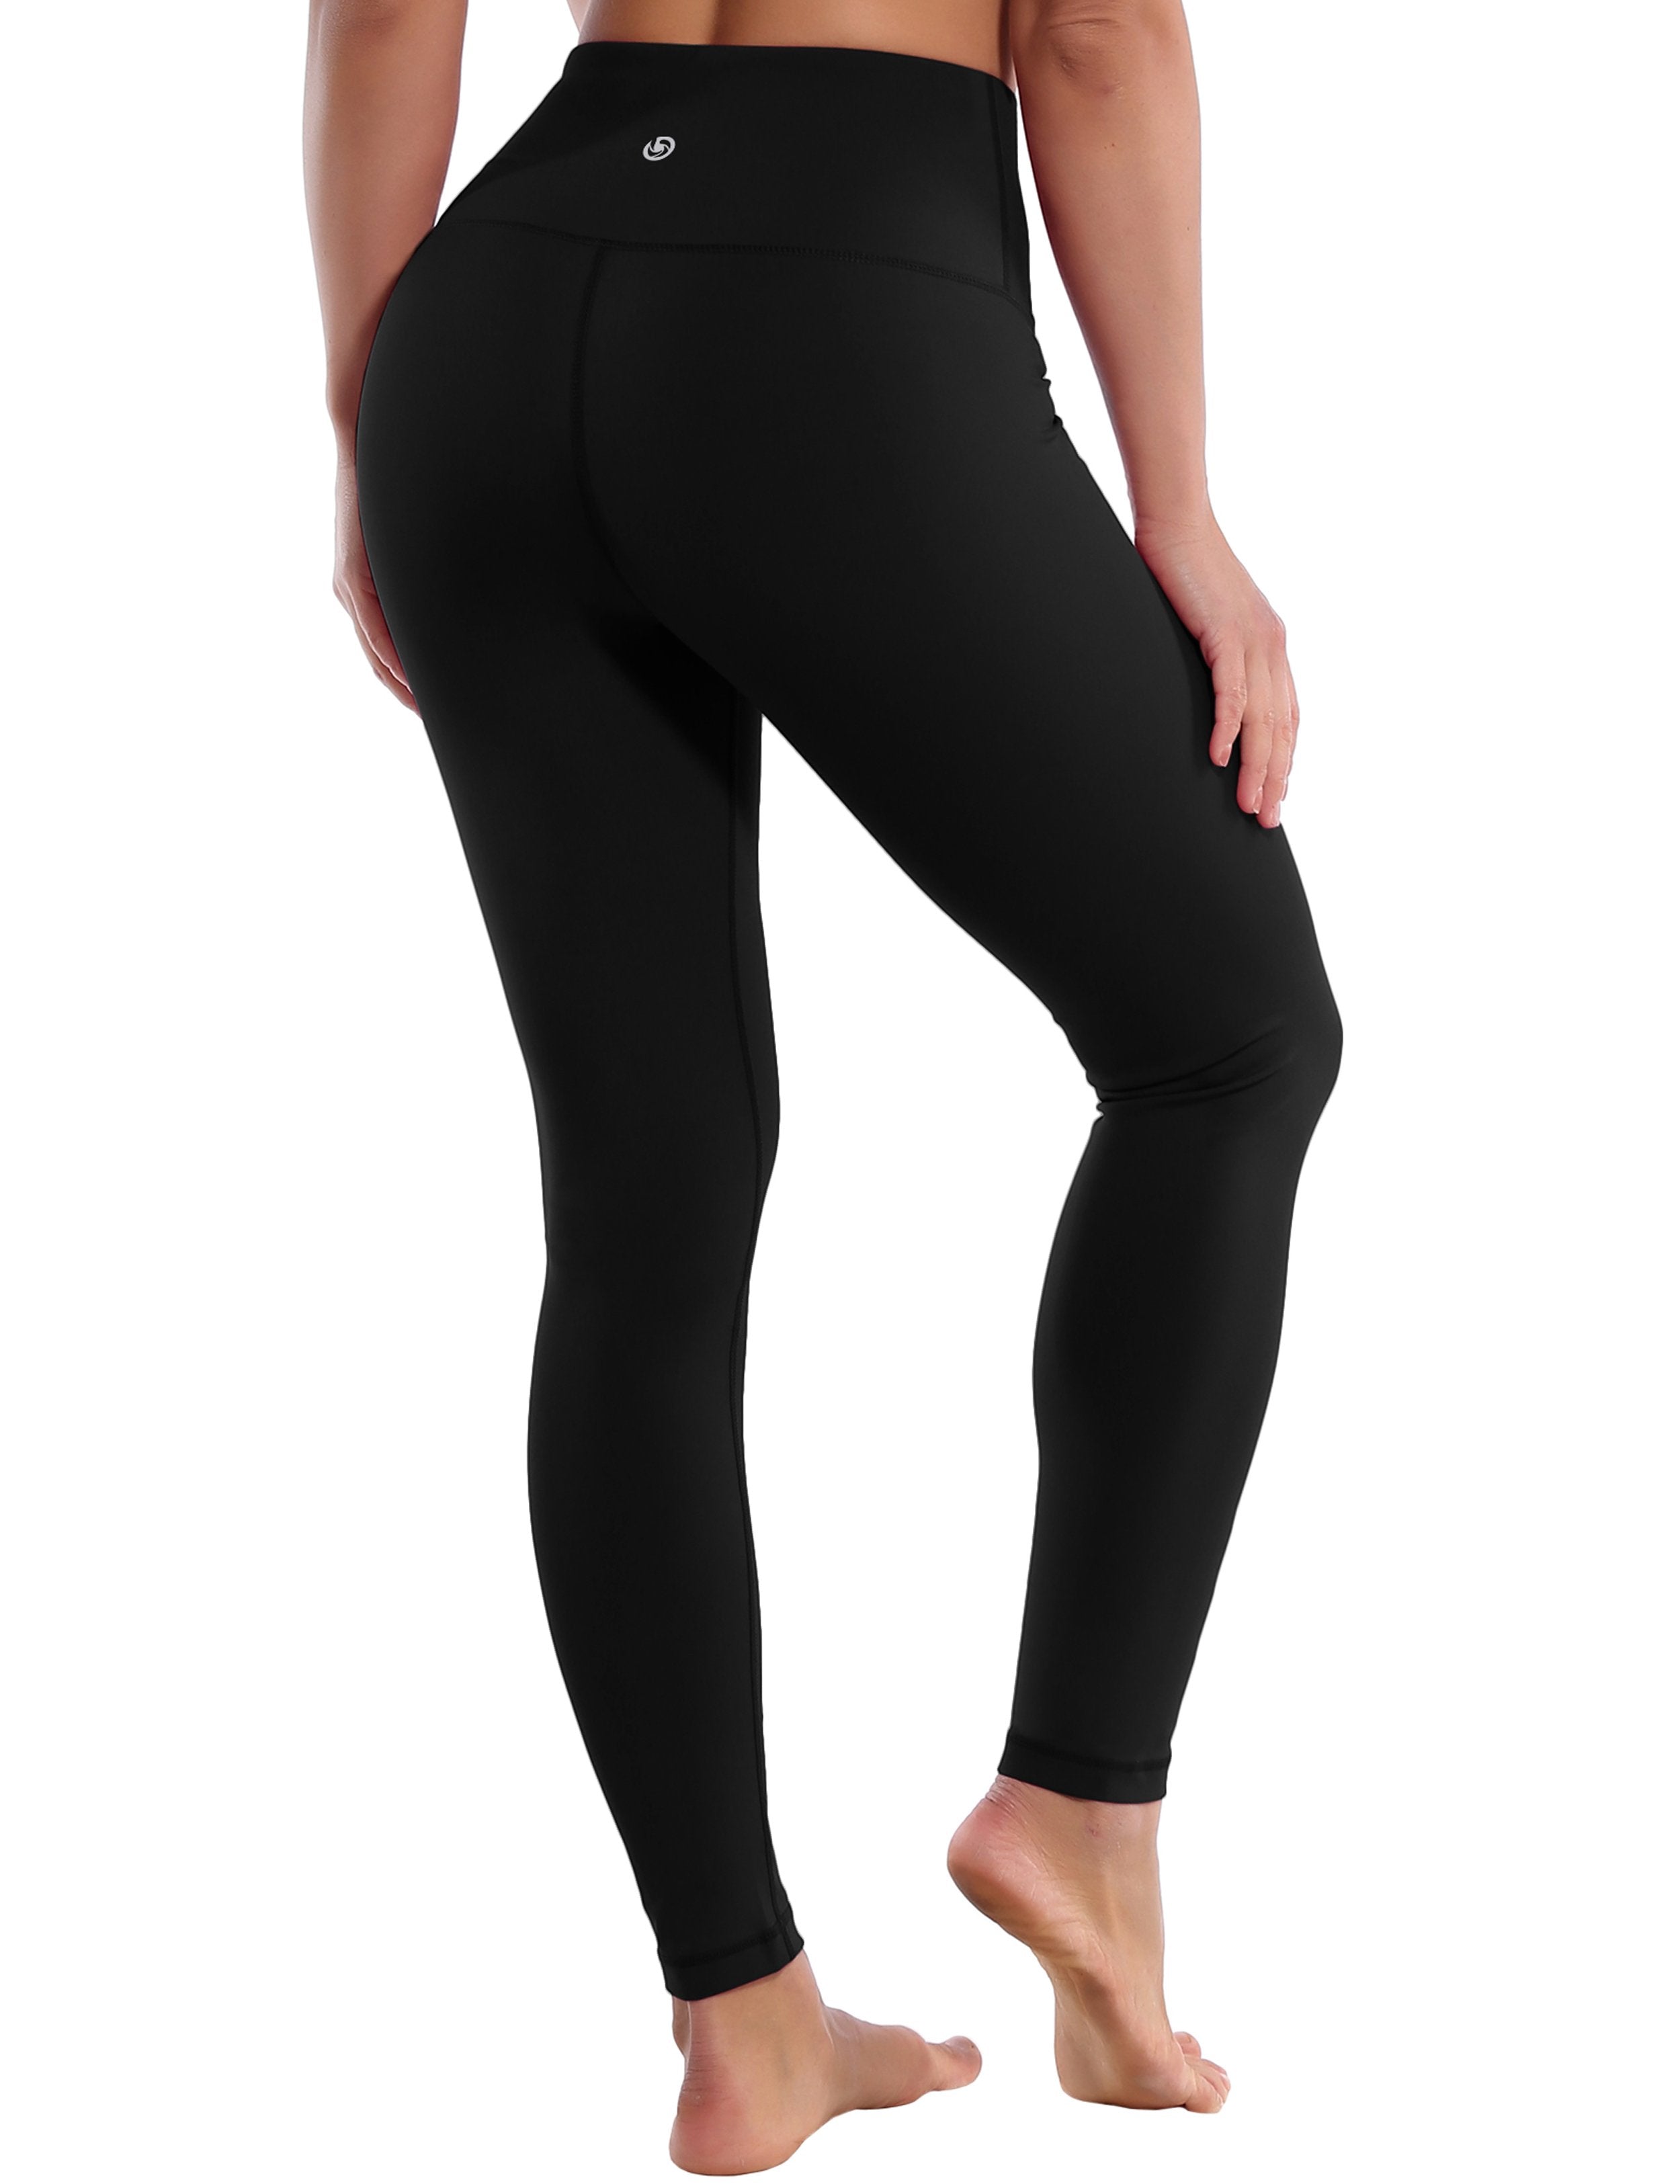 High Waist Gym Pants black 75%Nylon/25%Spandex Fabric doesn't attract lint easily 4-way stretch No see-through Moisture-wicking Tummy control Inner pocket Four lengths